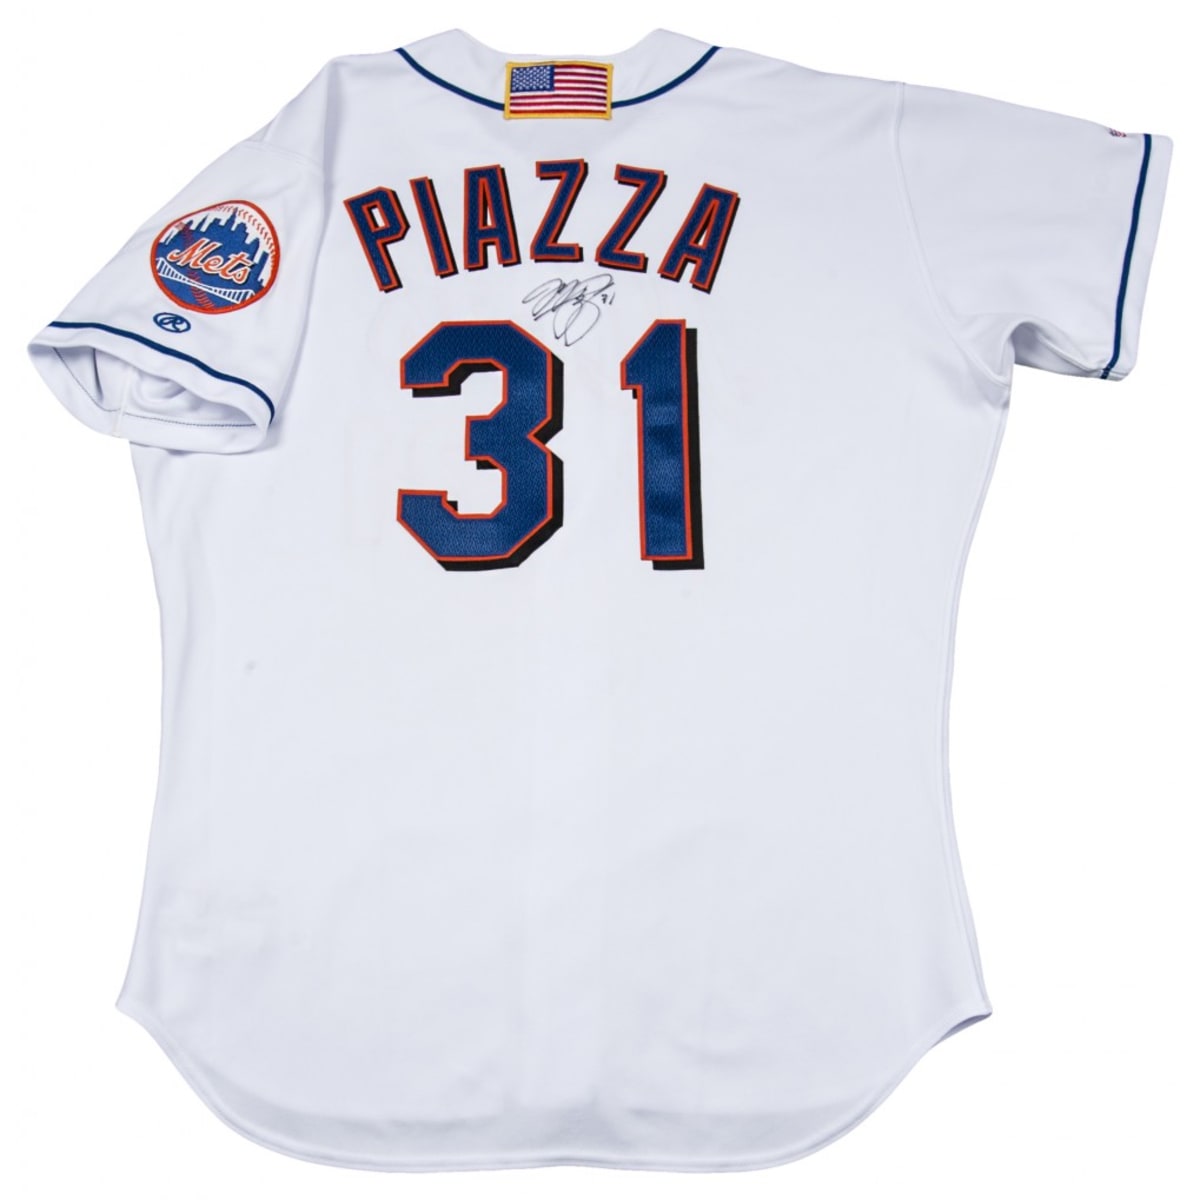 Mike Piazza Autographed Retirement Jersey - Mets History